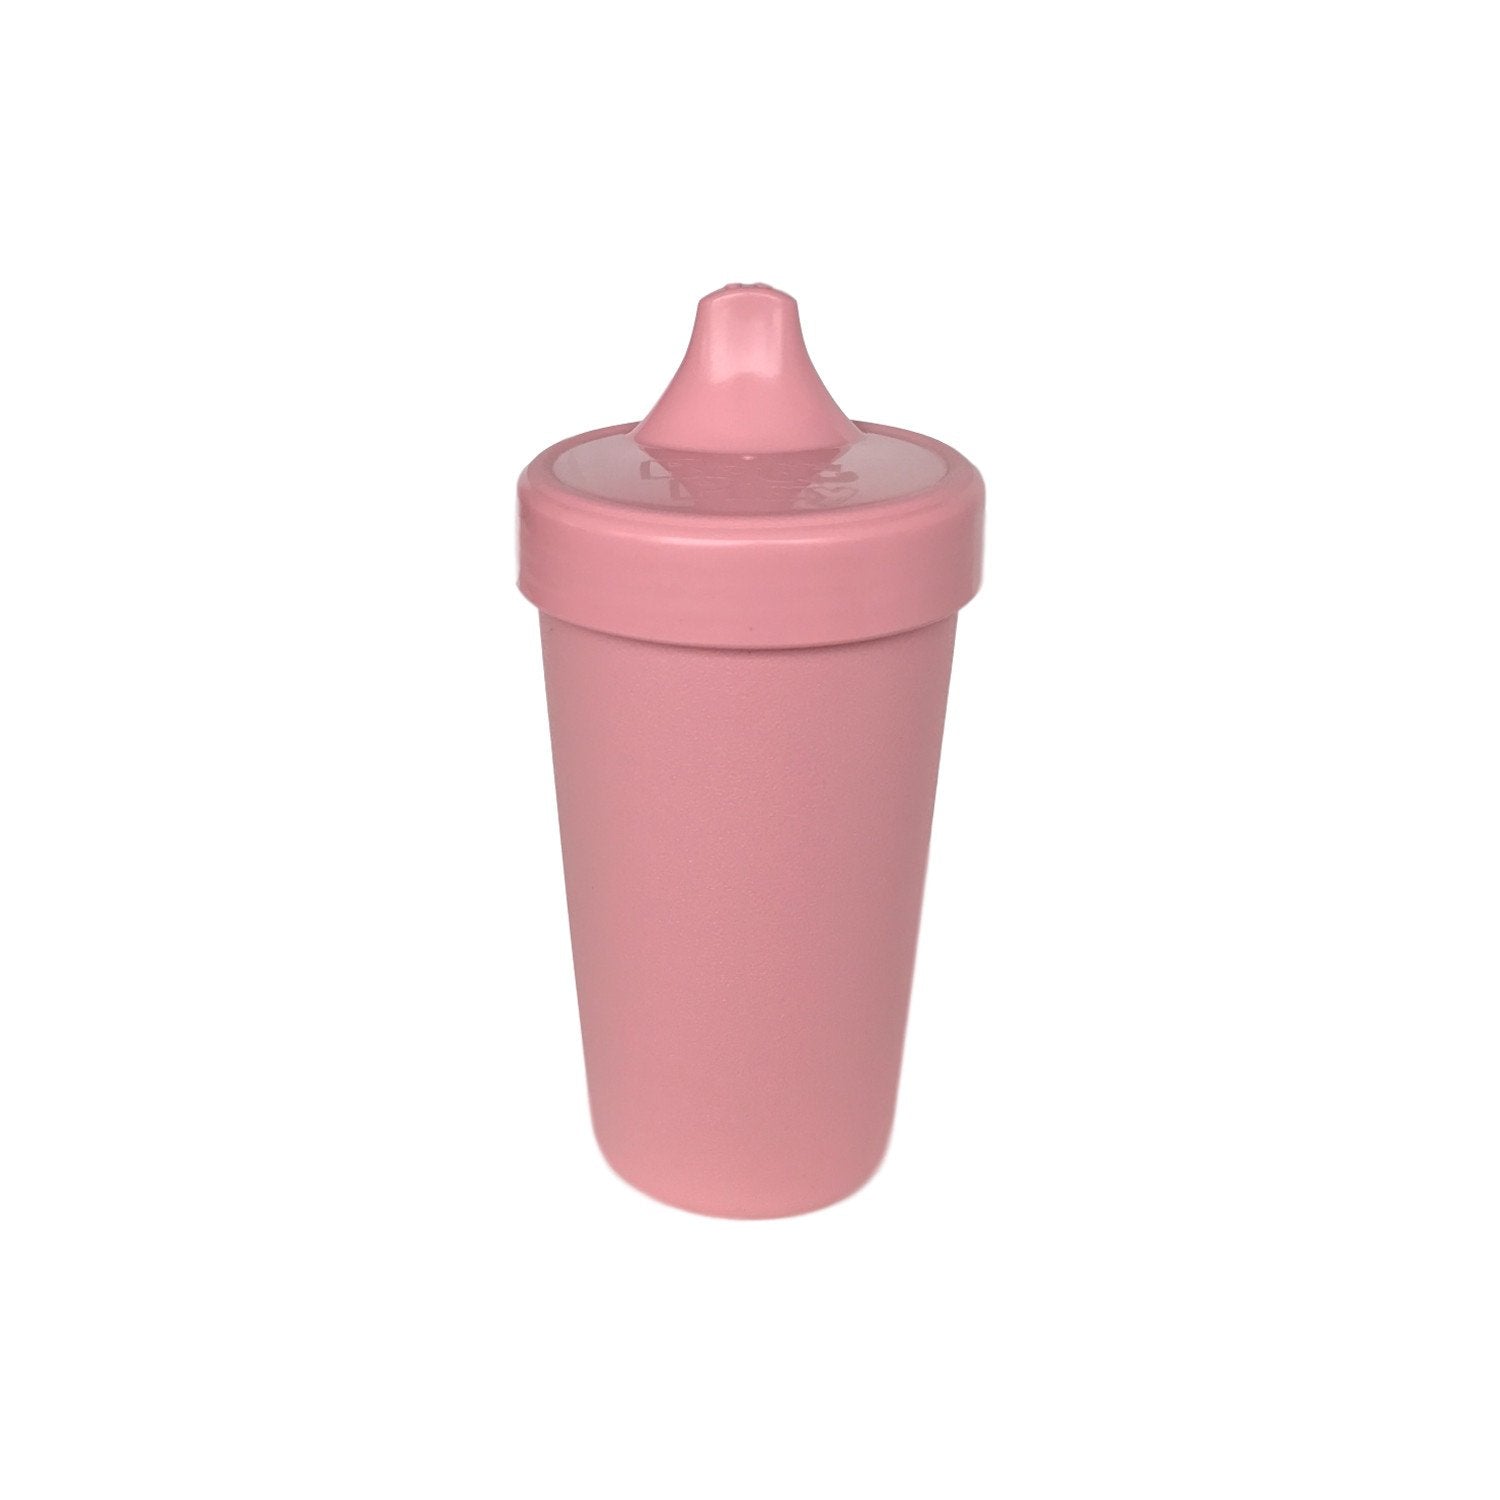 RE-PLAY NO-SPILL SIPPY CUP – Buttercup Baby Co.